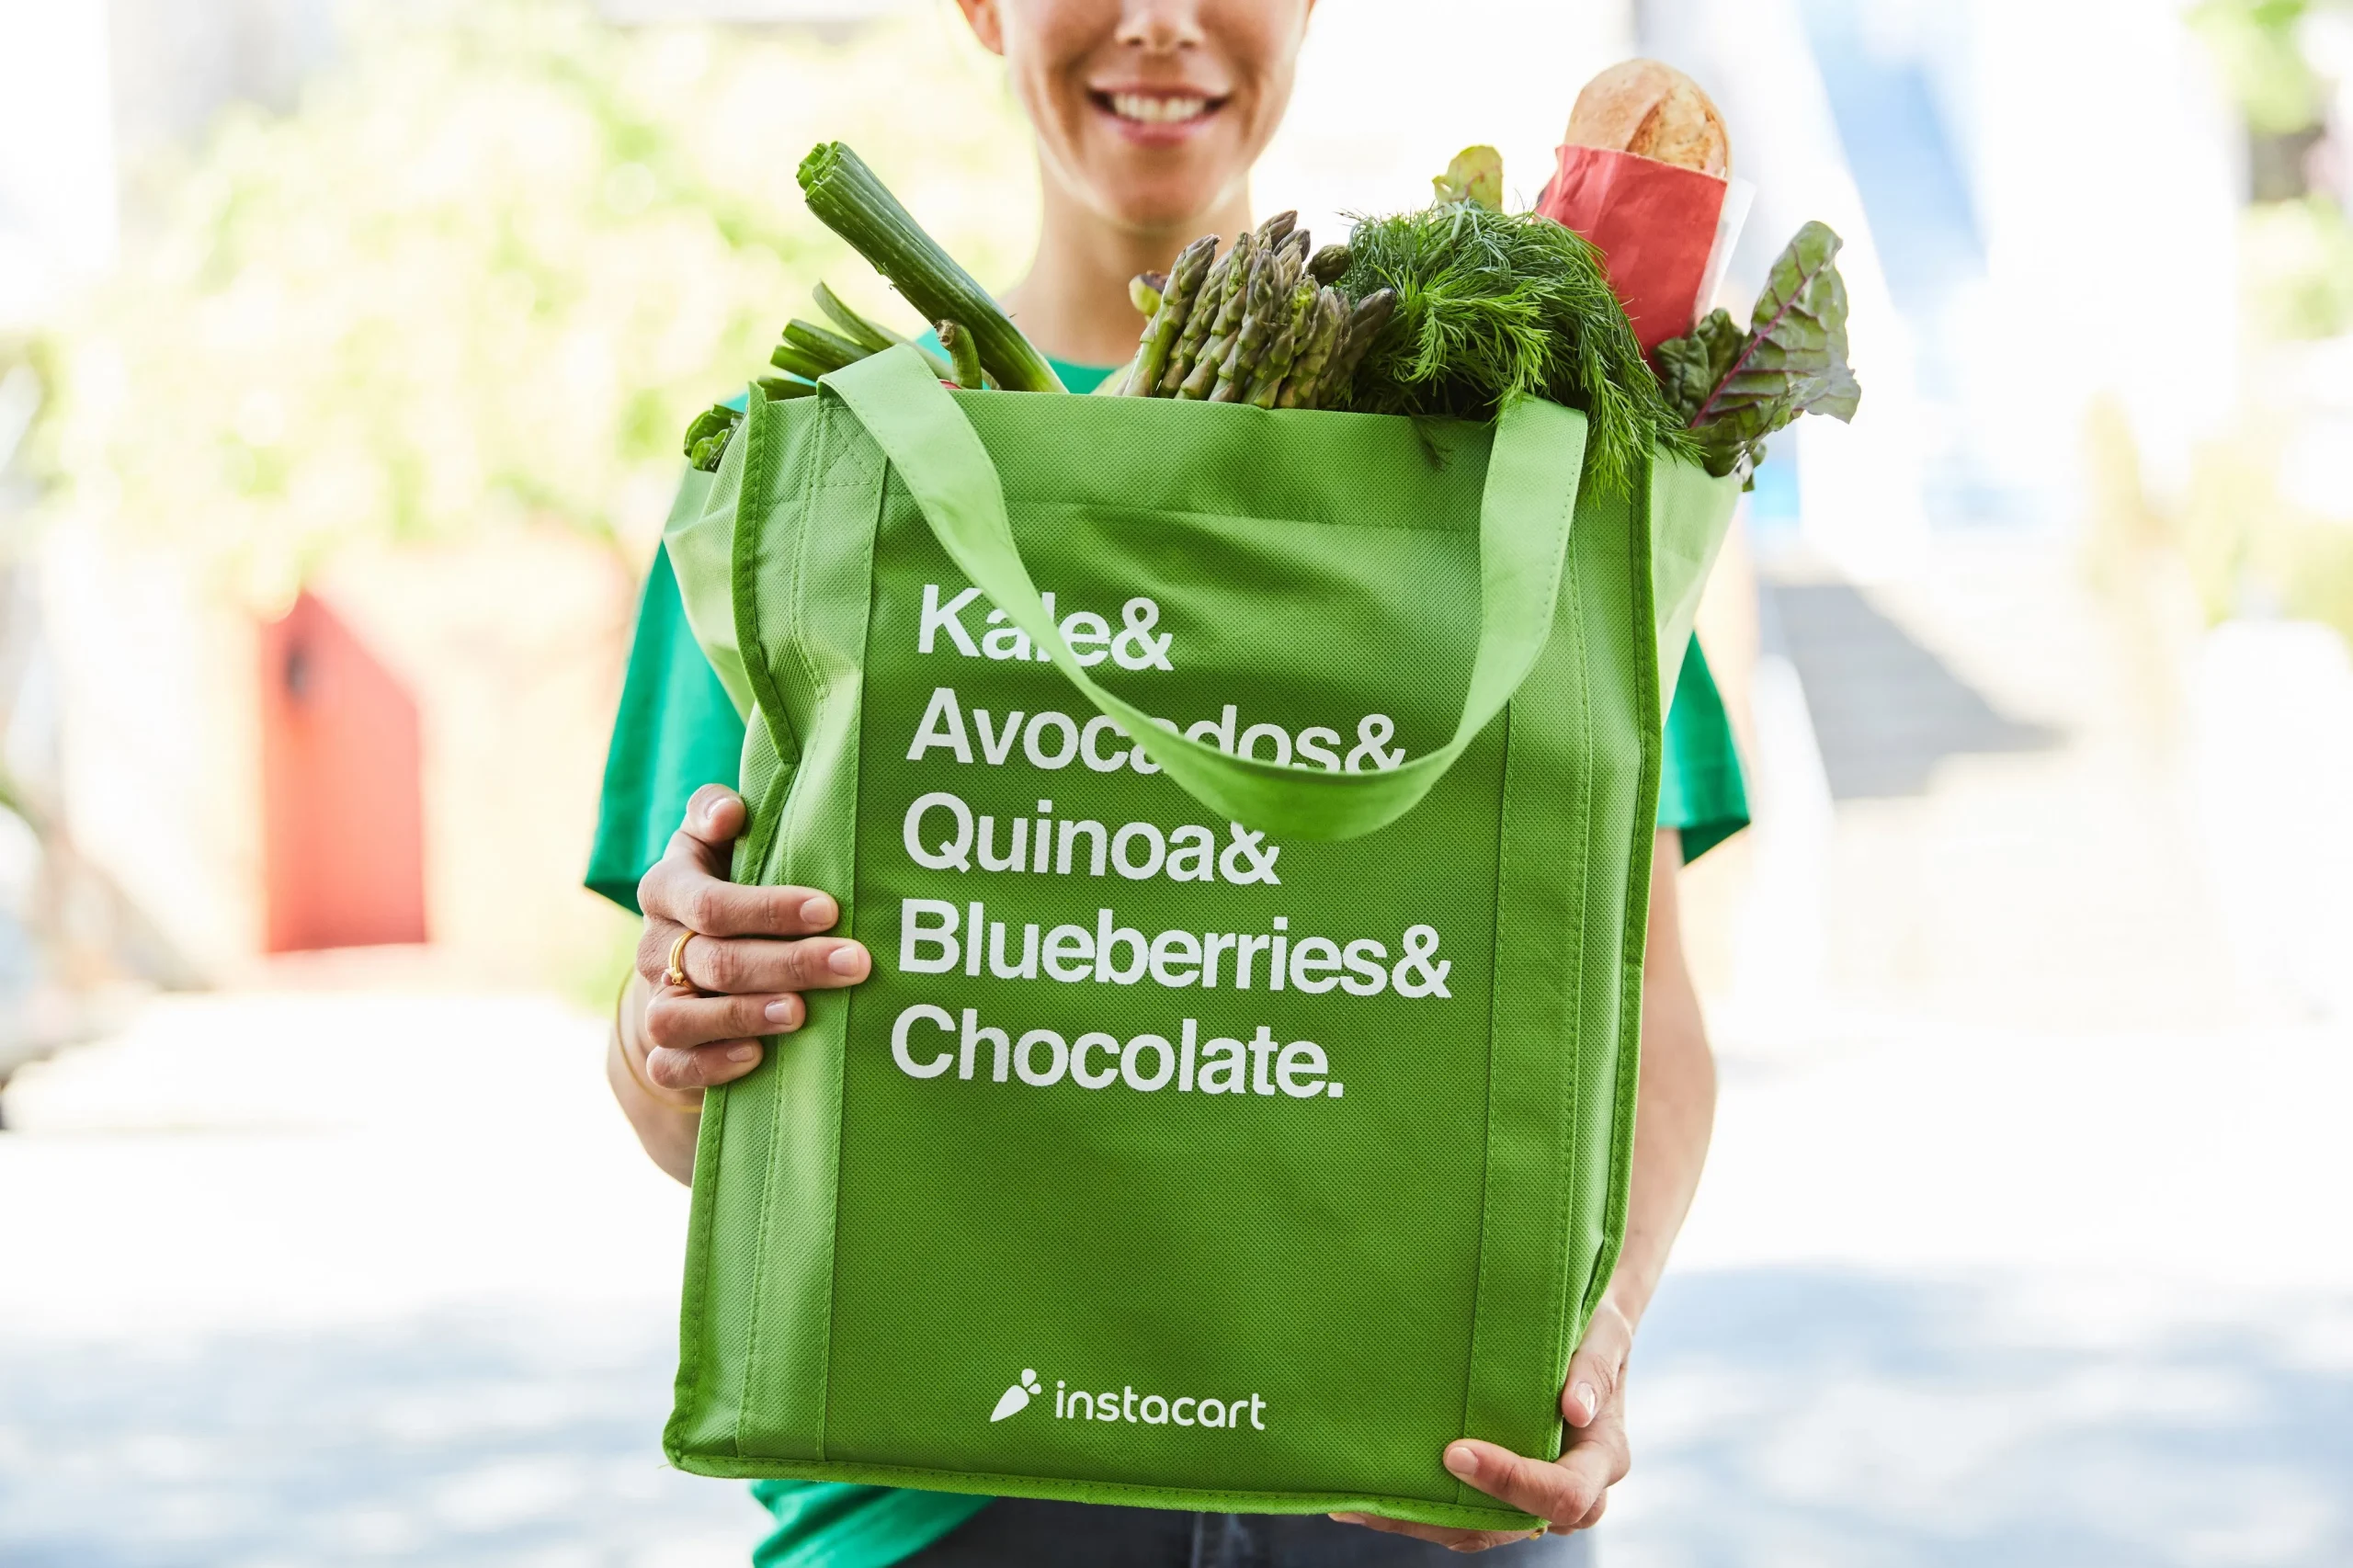 Instacart Website Review: A Convenient Online Grocery Delivery Service